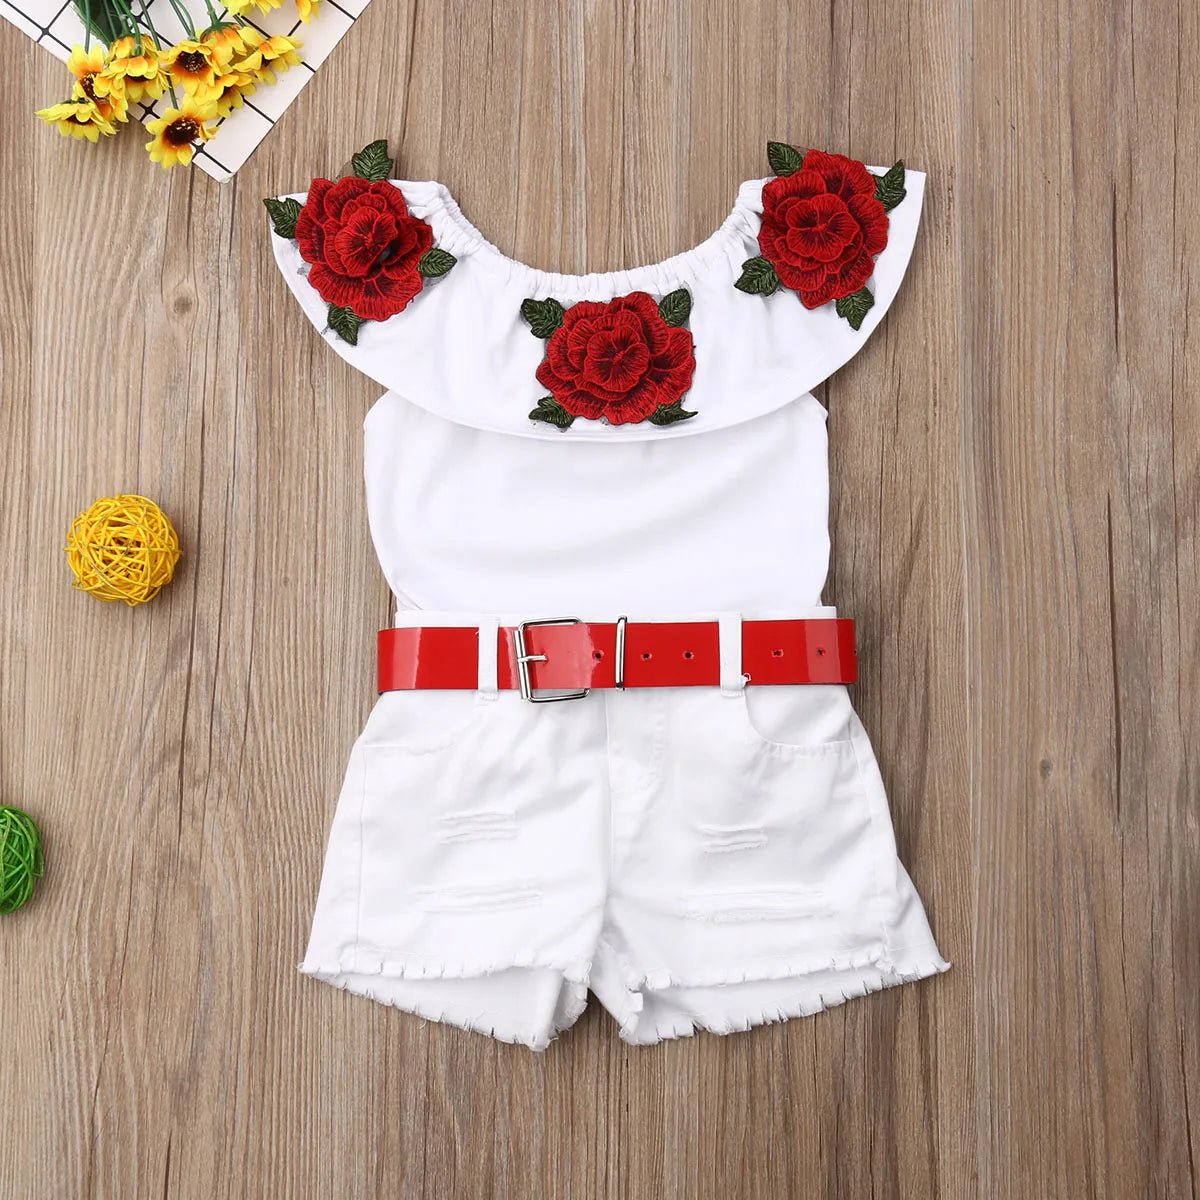 1-7 Years Infant Kid Baby Girls Clothes Set Off Shoulder 3D Rose Flower Ruffle White T-shirt Tops + Shorts Outfits Sets